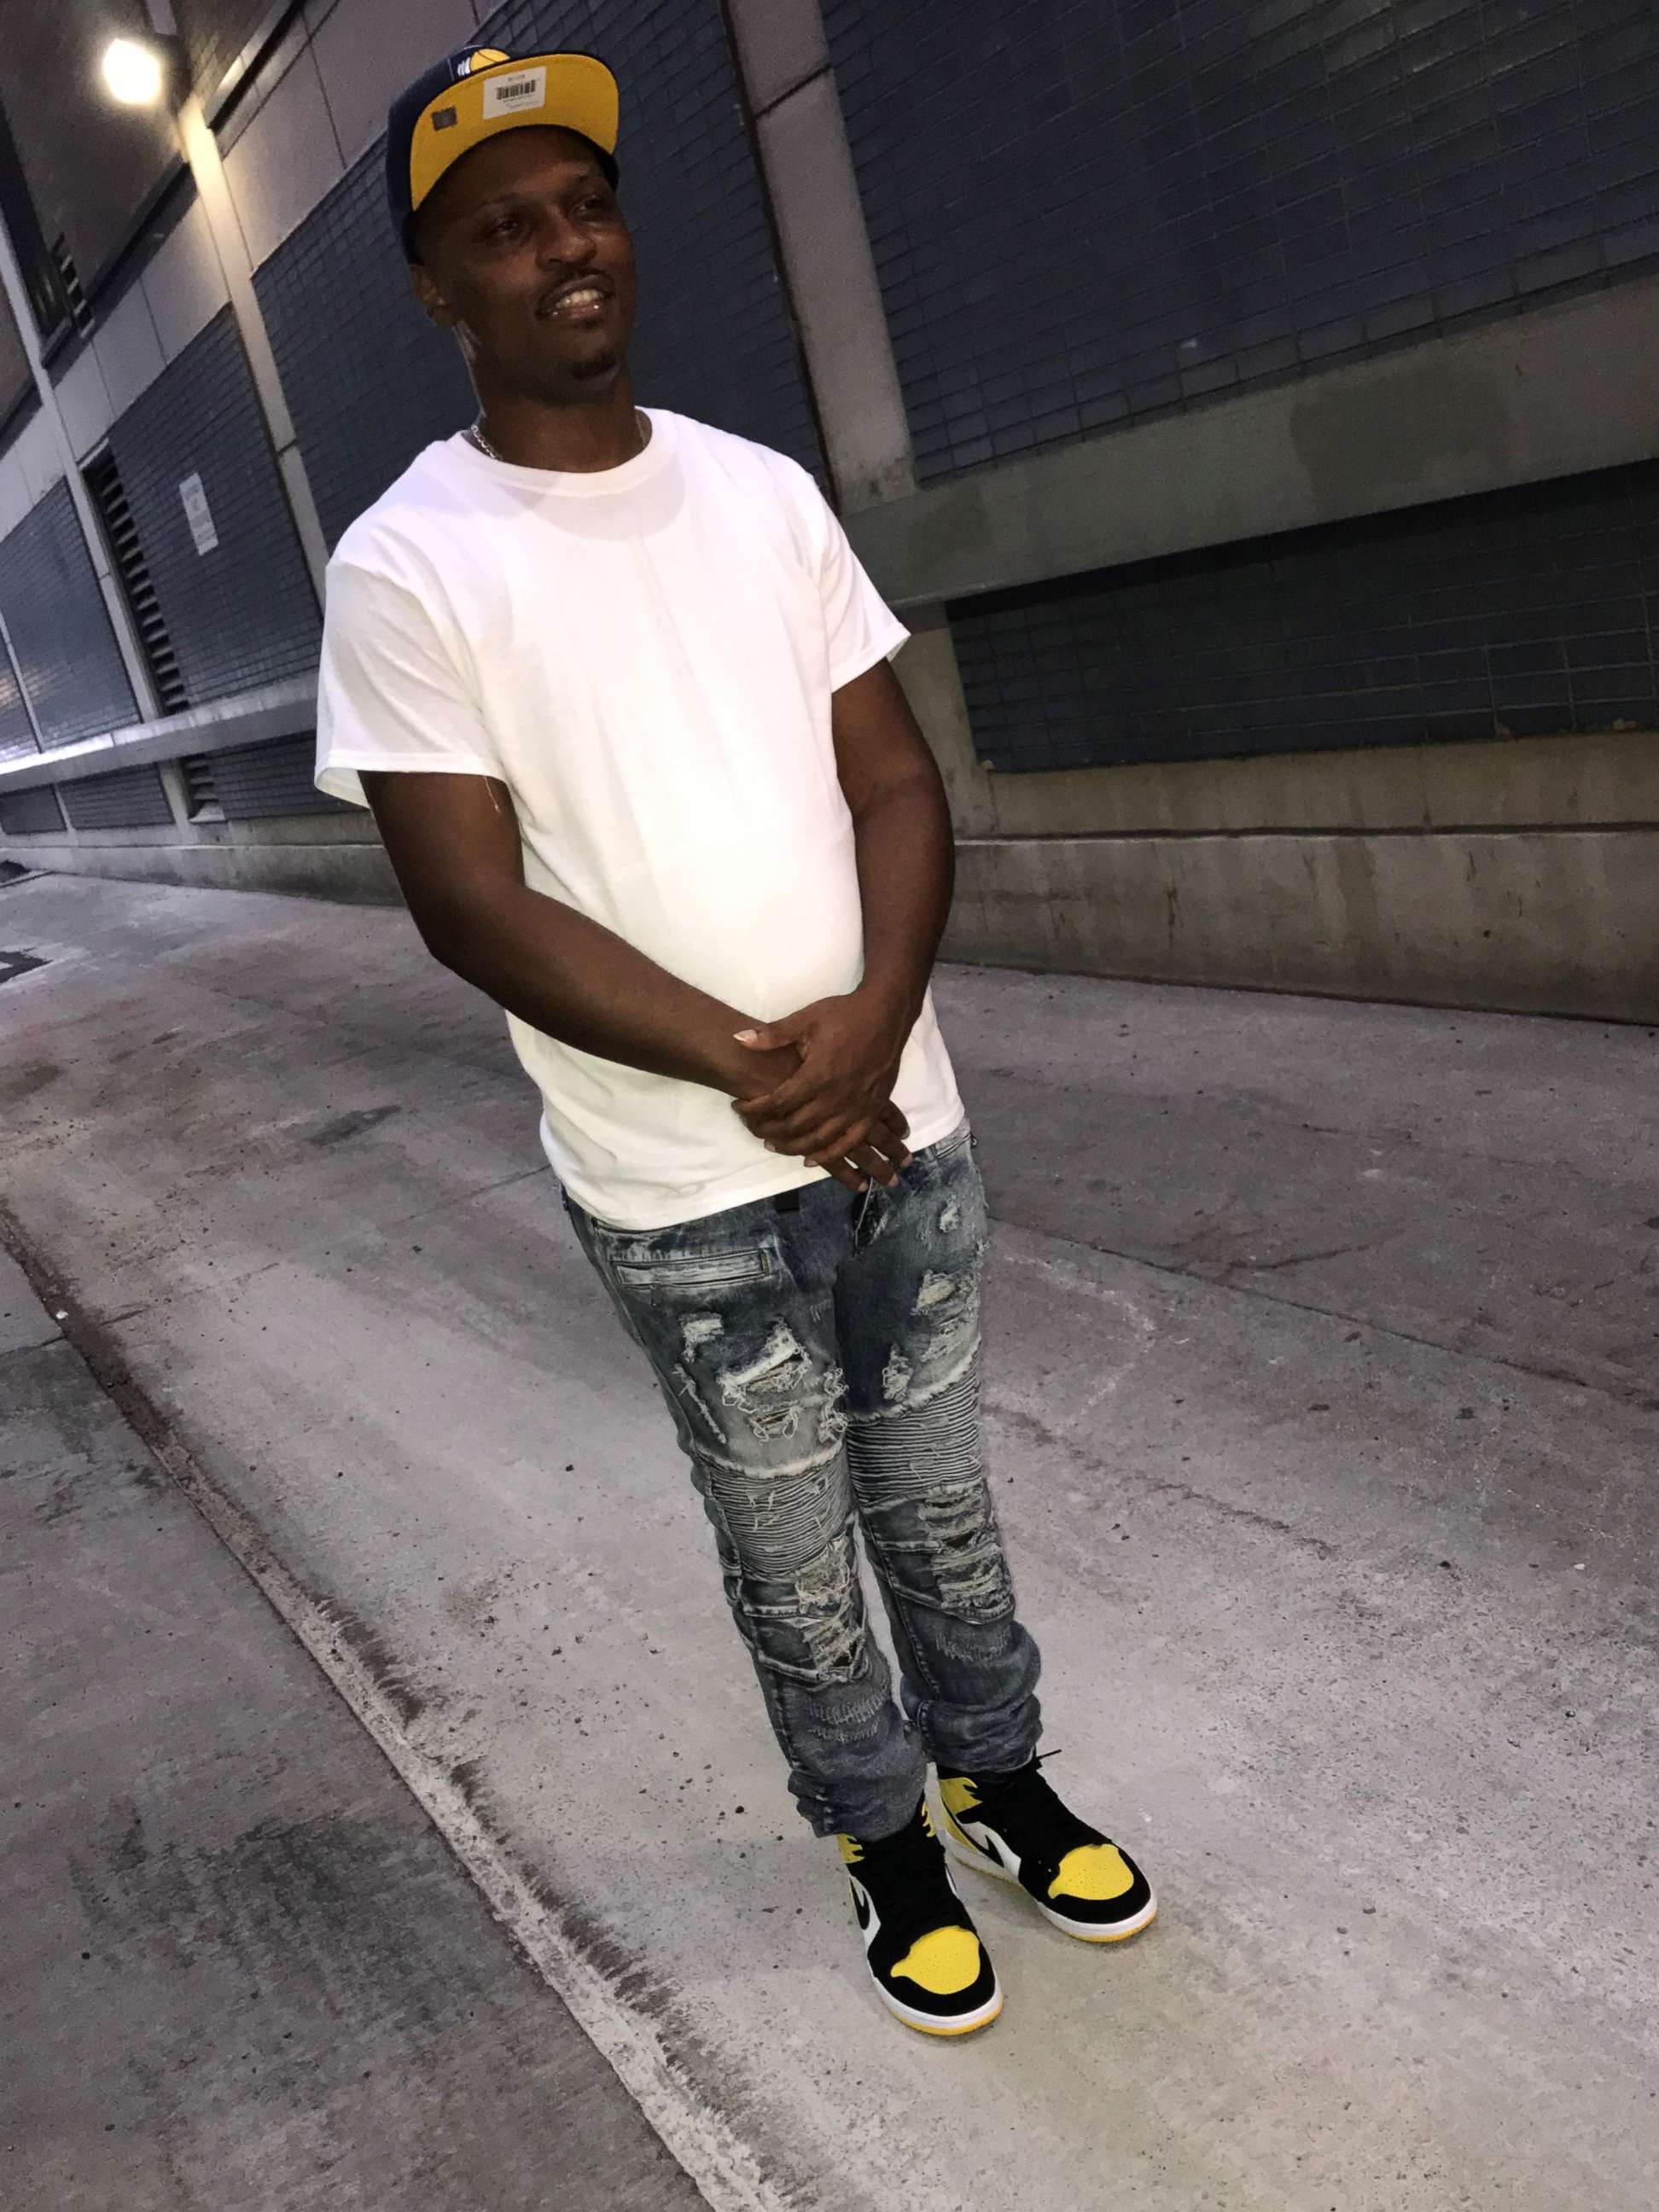 PHOTO: Rashad Cunningham, pictured here, was shot and killed by a police officer as he sat in front of his home in Gary, Indiana, on Aug. 17, 2019.